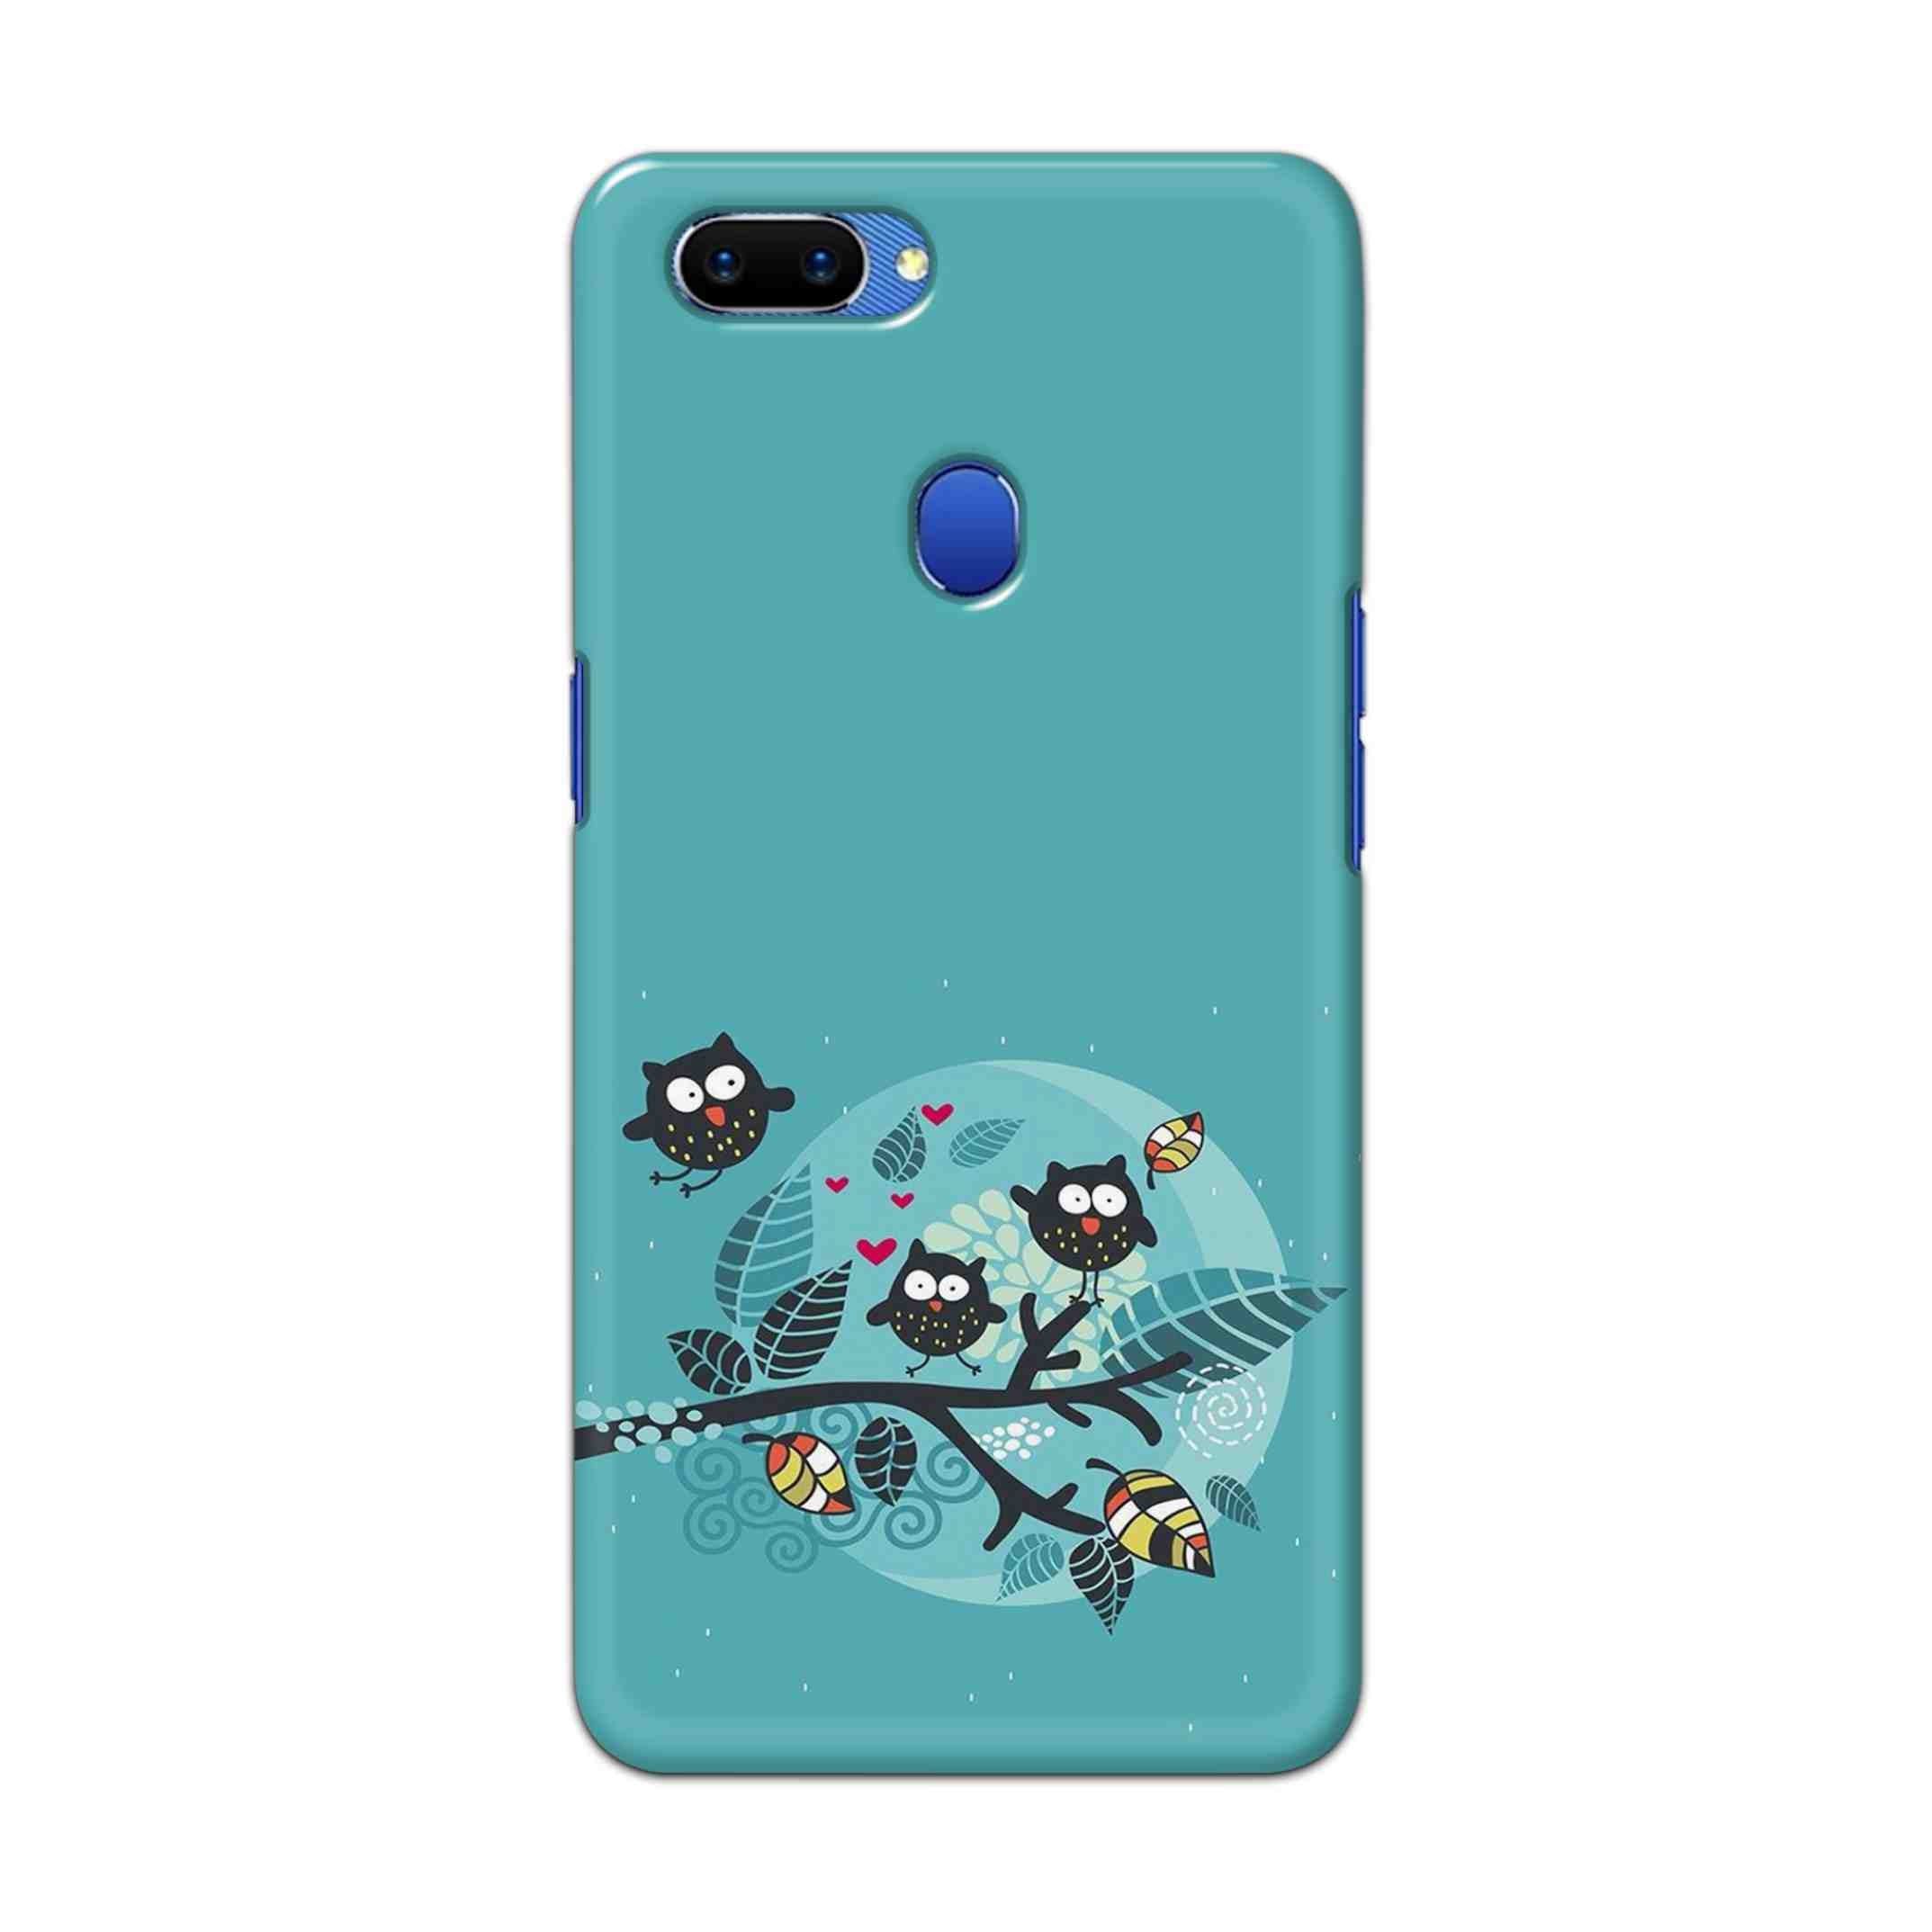 Buy Owl Hard Back Mobile Phone Case Cover For Oppo A5 Online